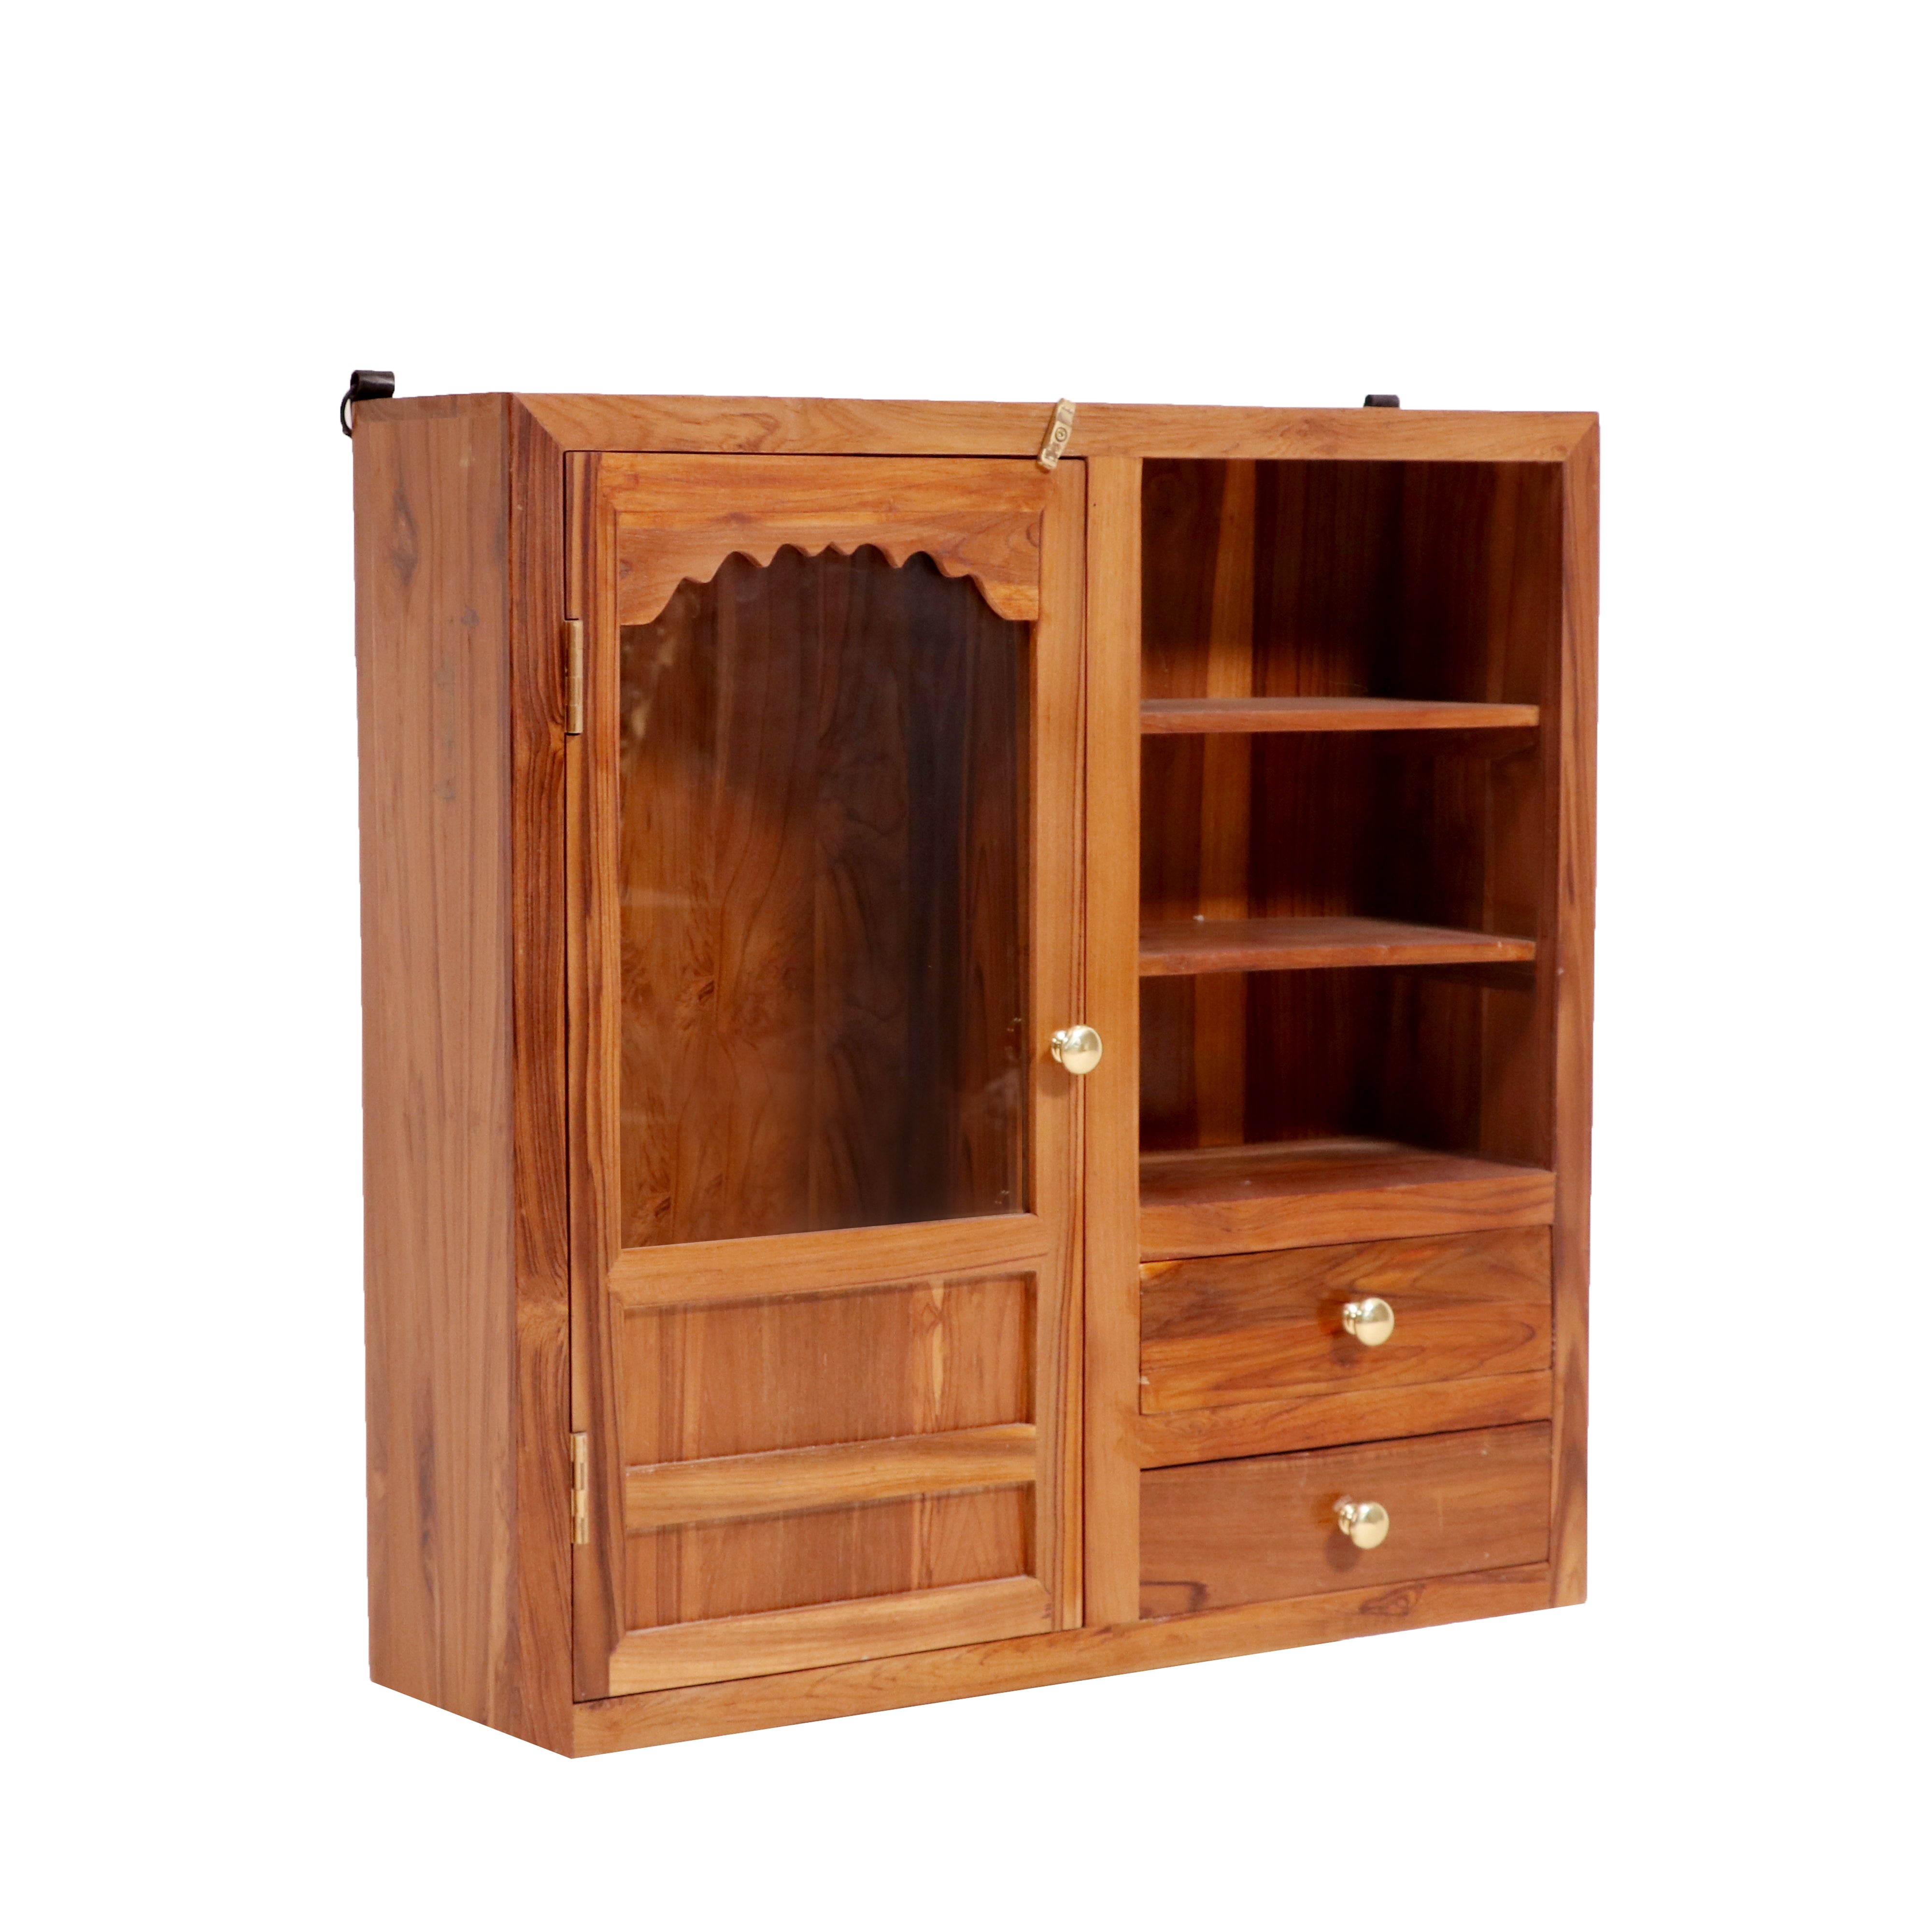 Wide teak wood wall cabinet for Kitchen storage Wall Cabinet